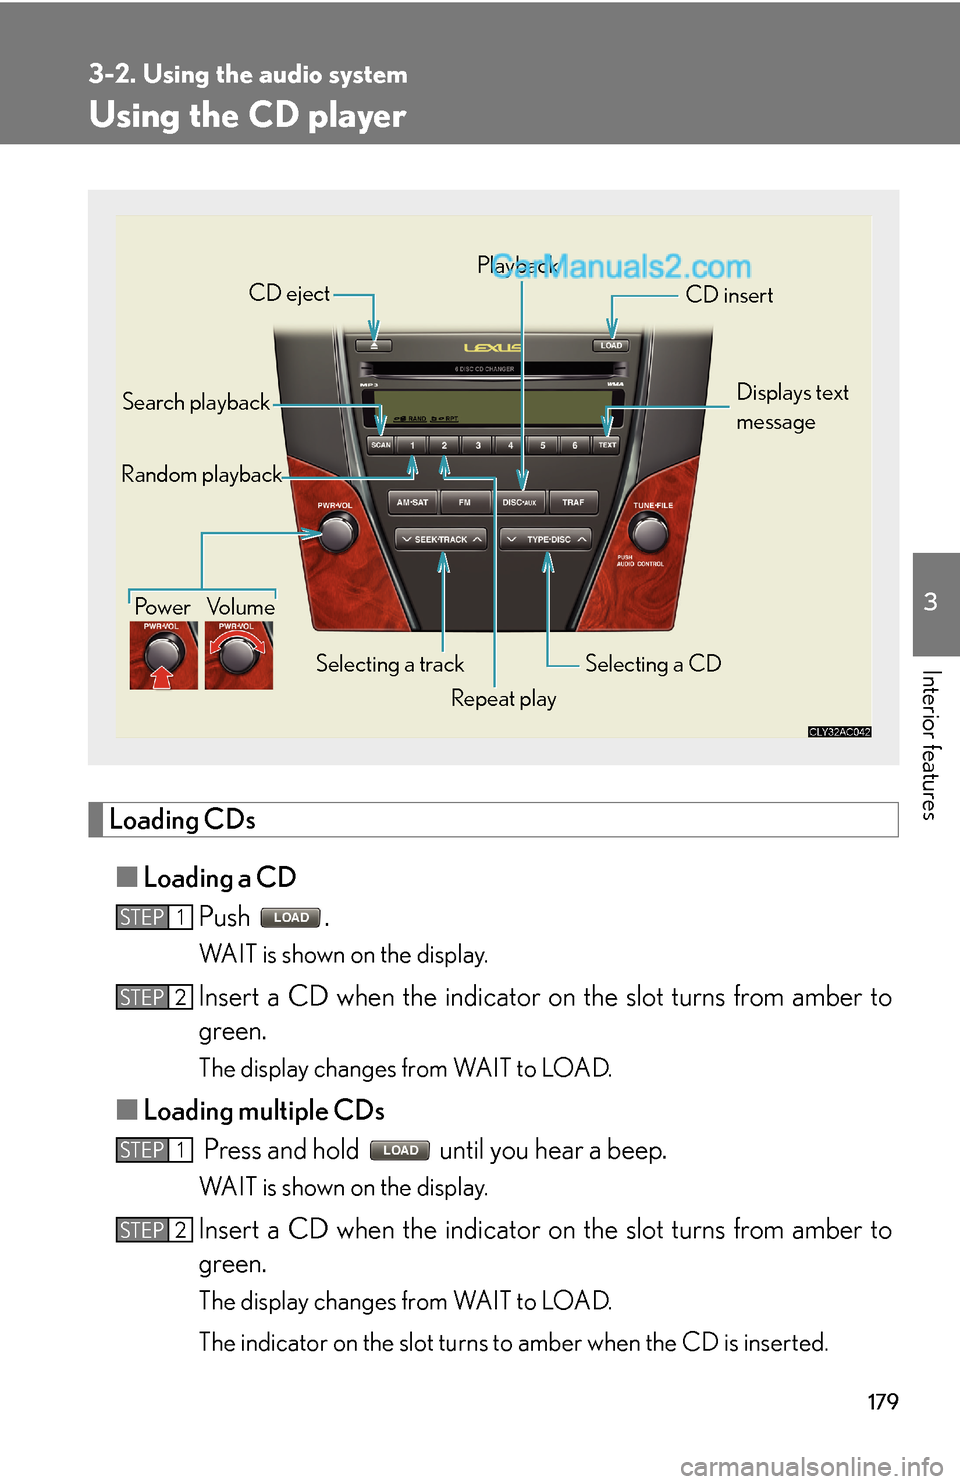 Lexus ES350 2007  Using the audio system 179
3-2. Using the audio system
3
Interior features
Using the CD player
Loading CDs
■Loading a CD
Push .
WAIT is shown on the display.
Insert a CD when the indicator on the slot turns from amber to
